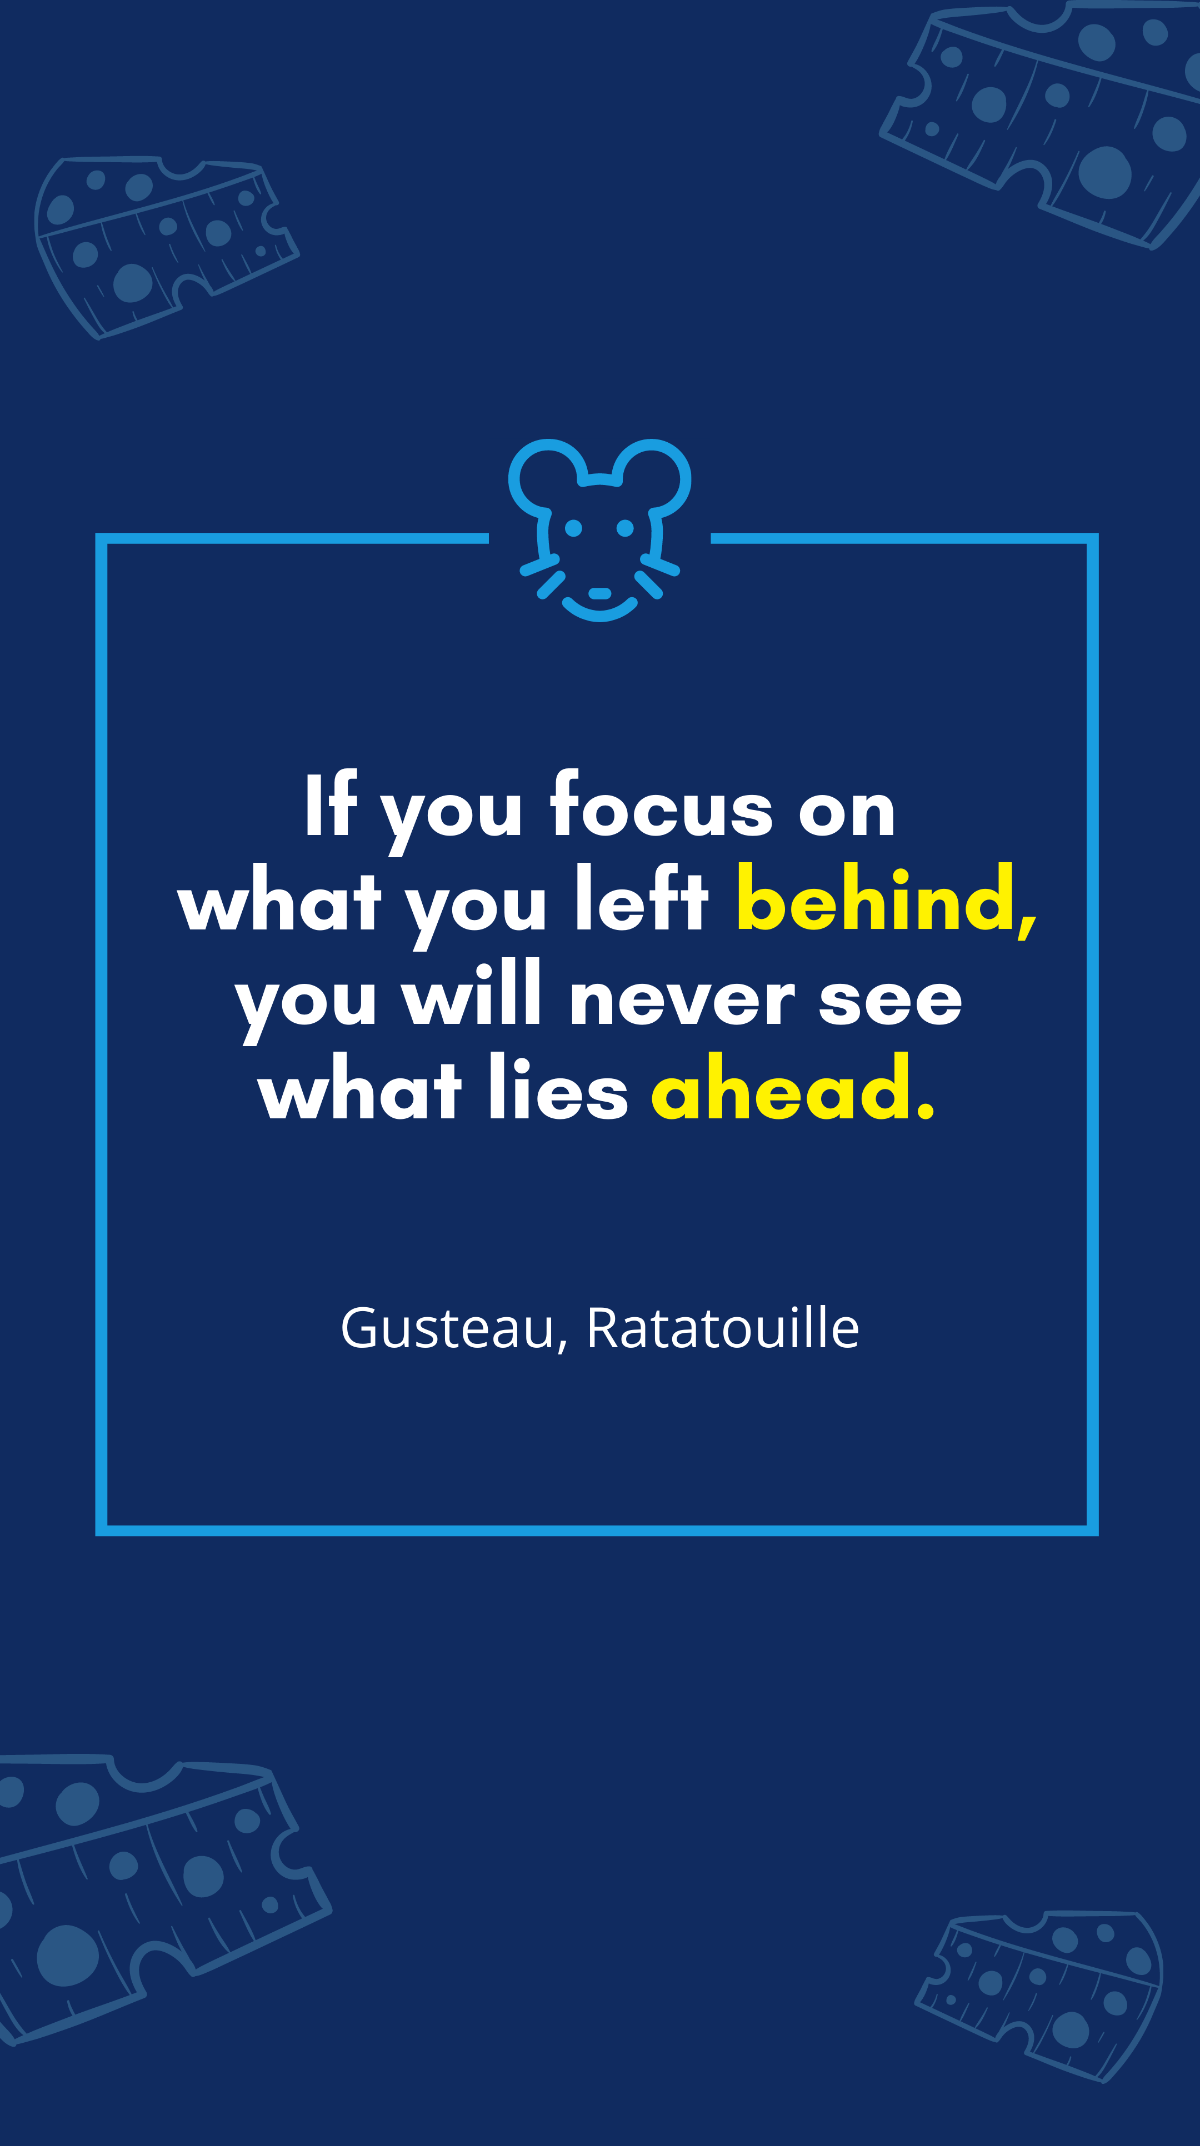 Gusteau, Ratatouille - If you focus on what you left behind, you will never see what lies ahead